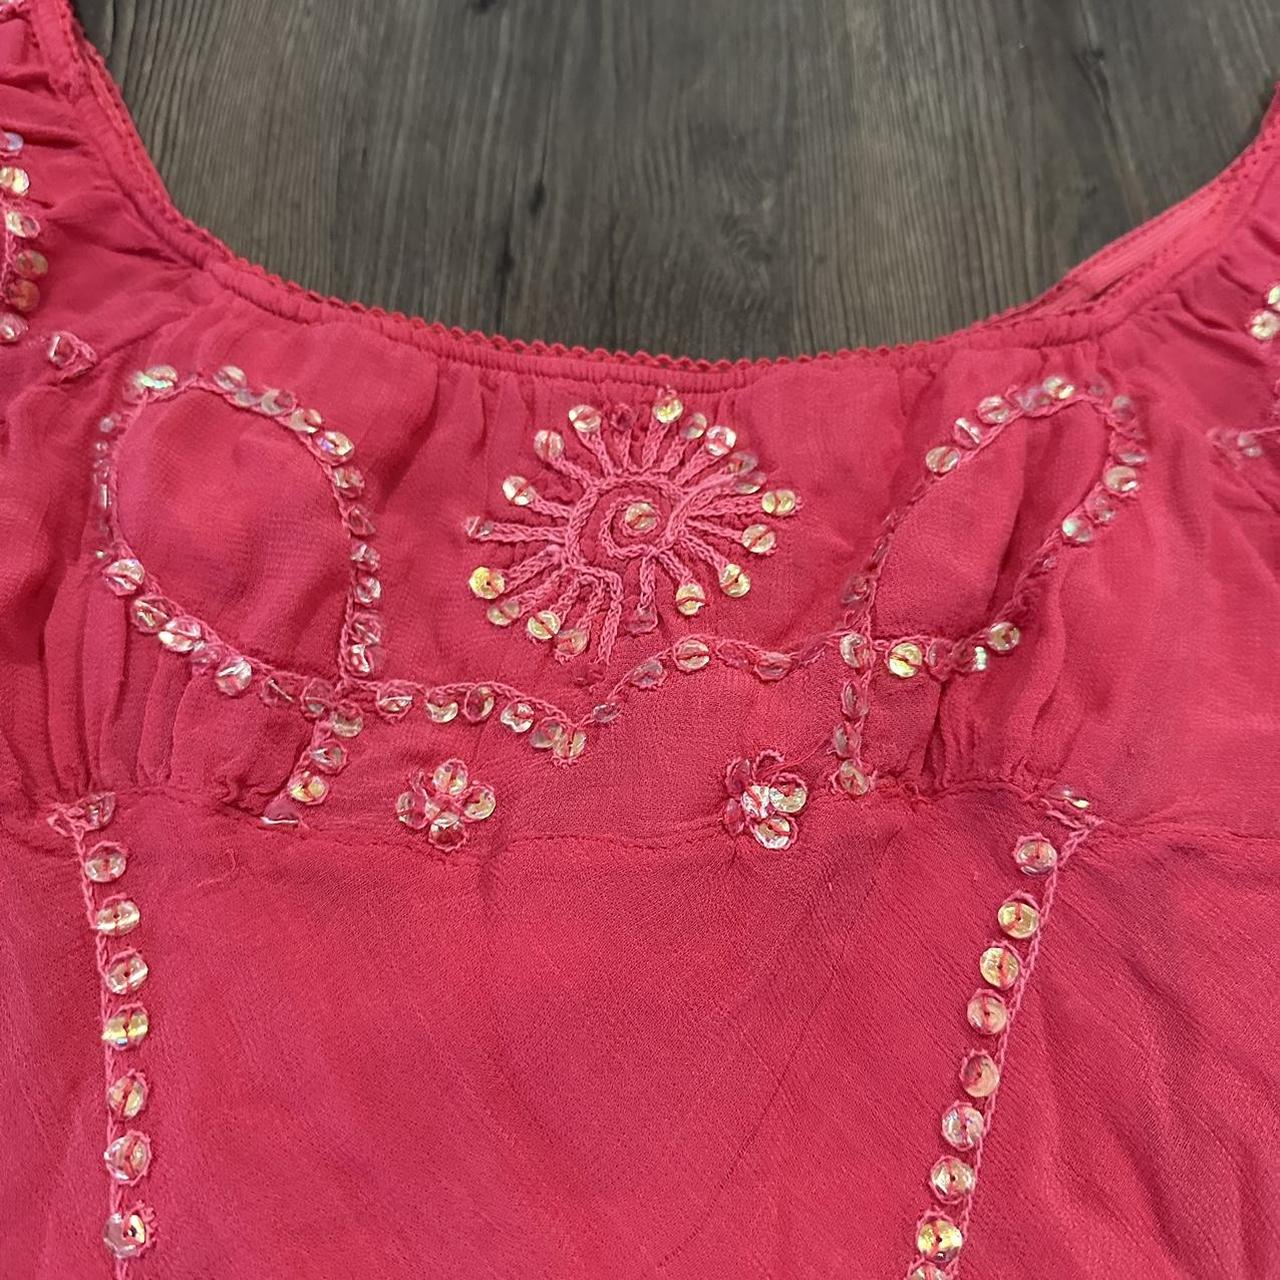 Charlotte Russe Women's Pink Blouse (6)